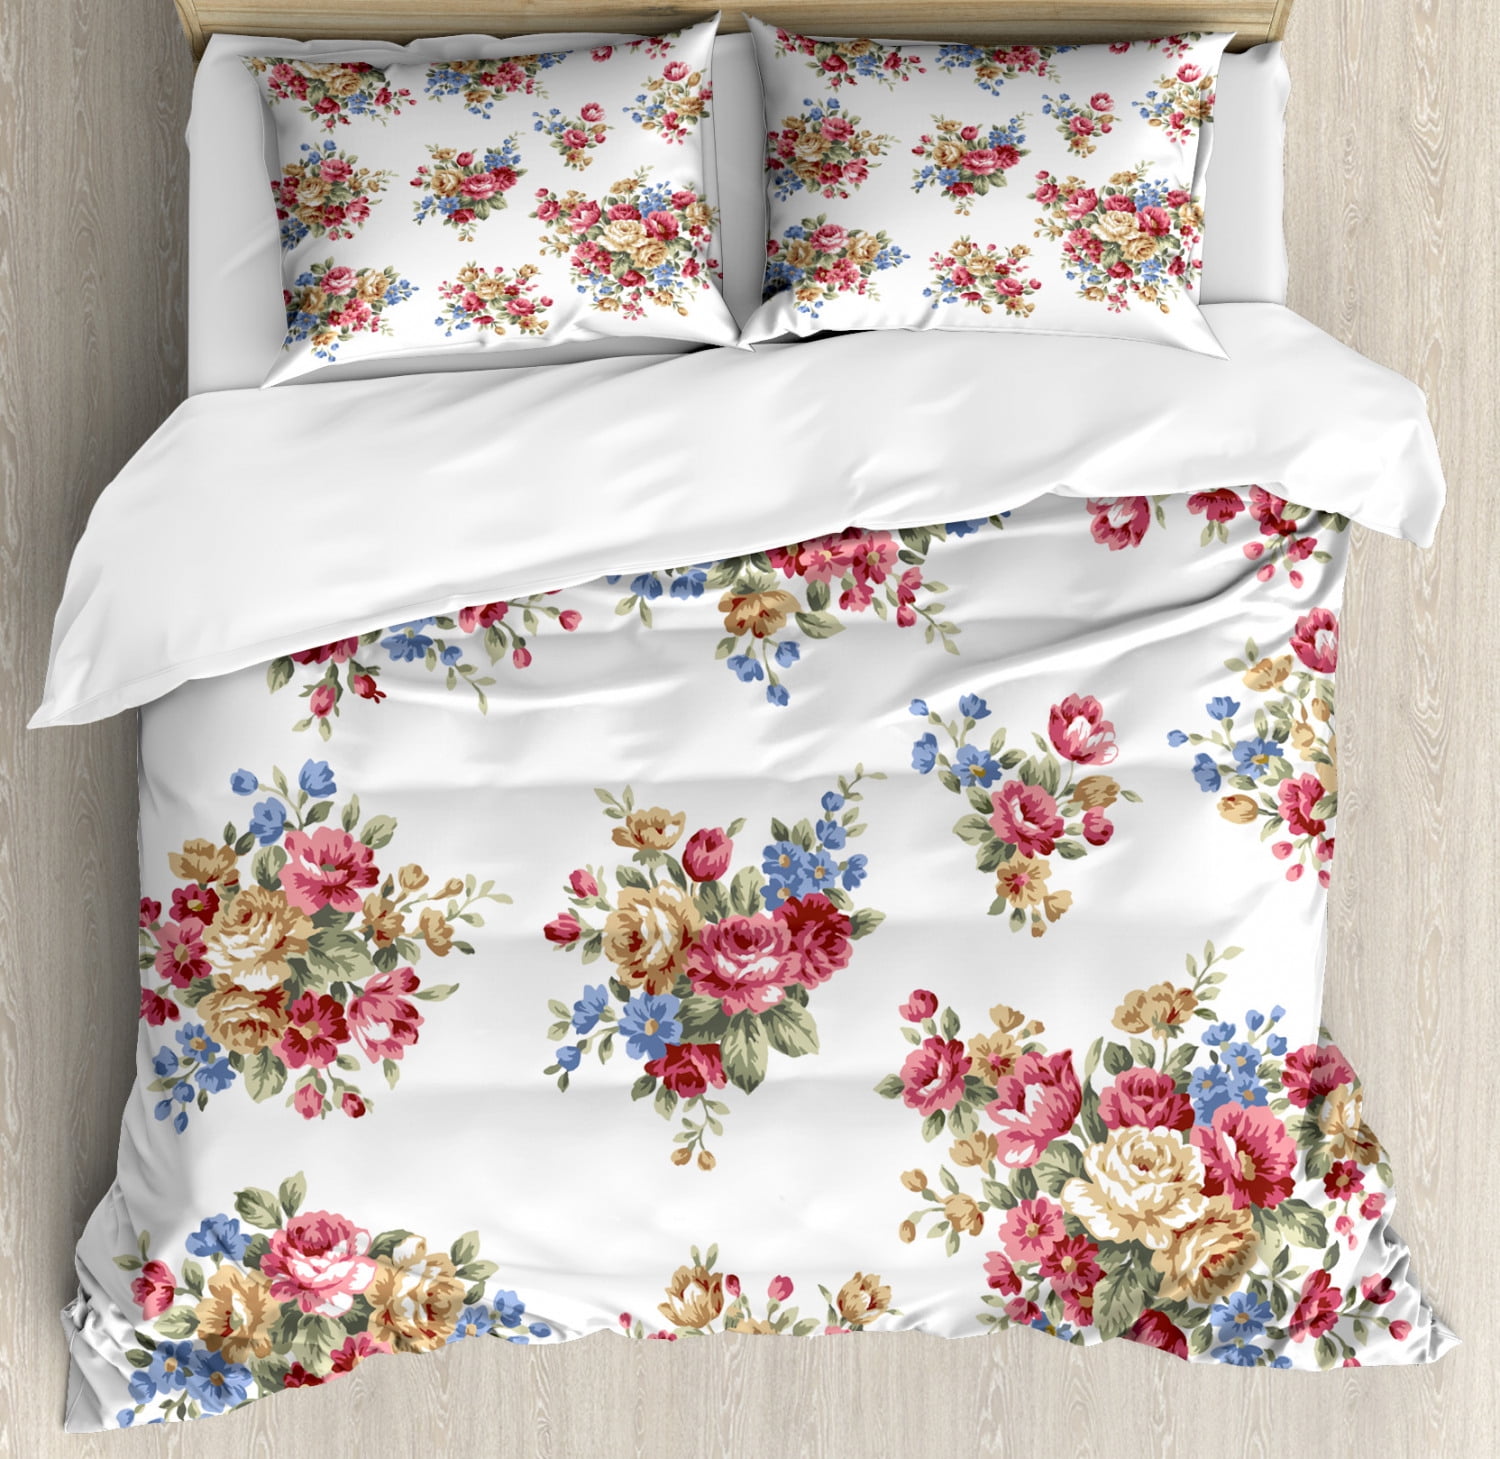 Vintage Floral Reversible Comforter with Pillowcases King Size Flower Bedding